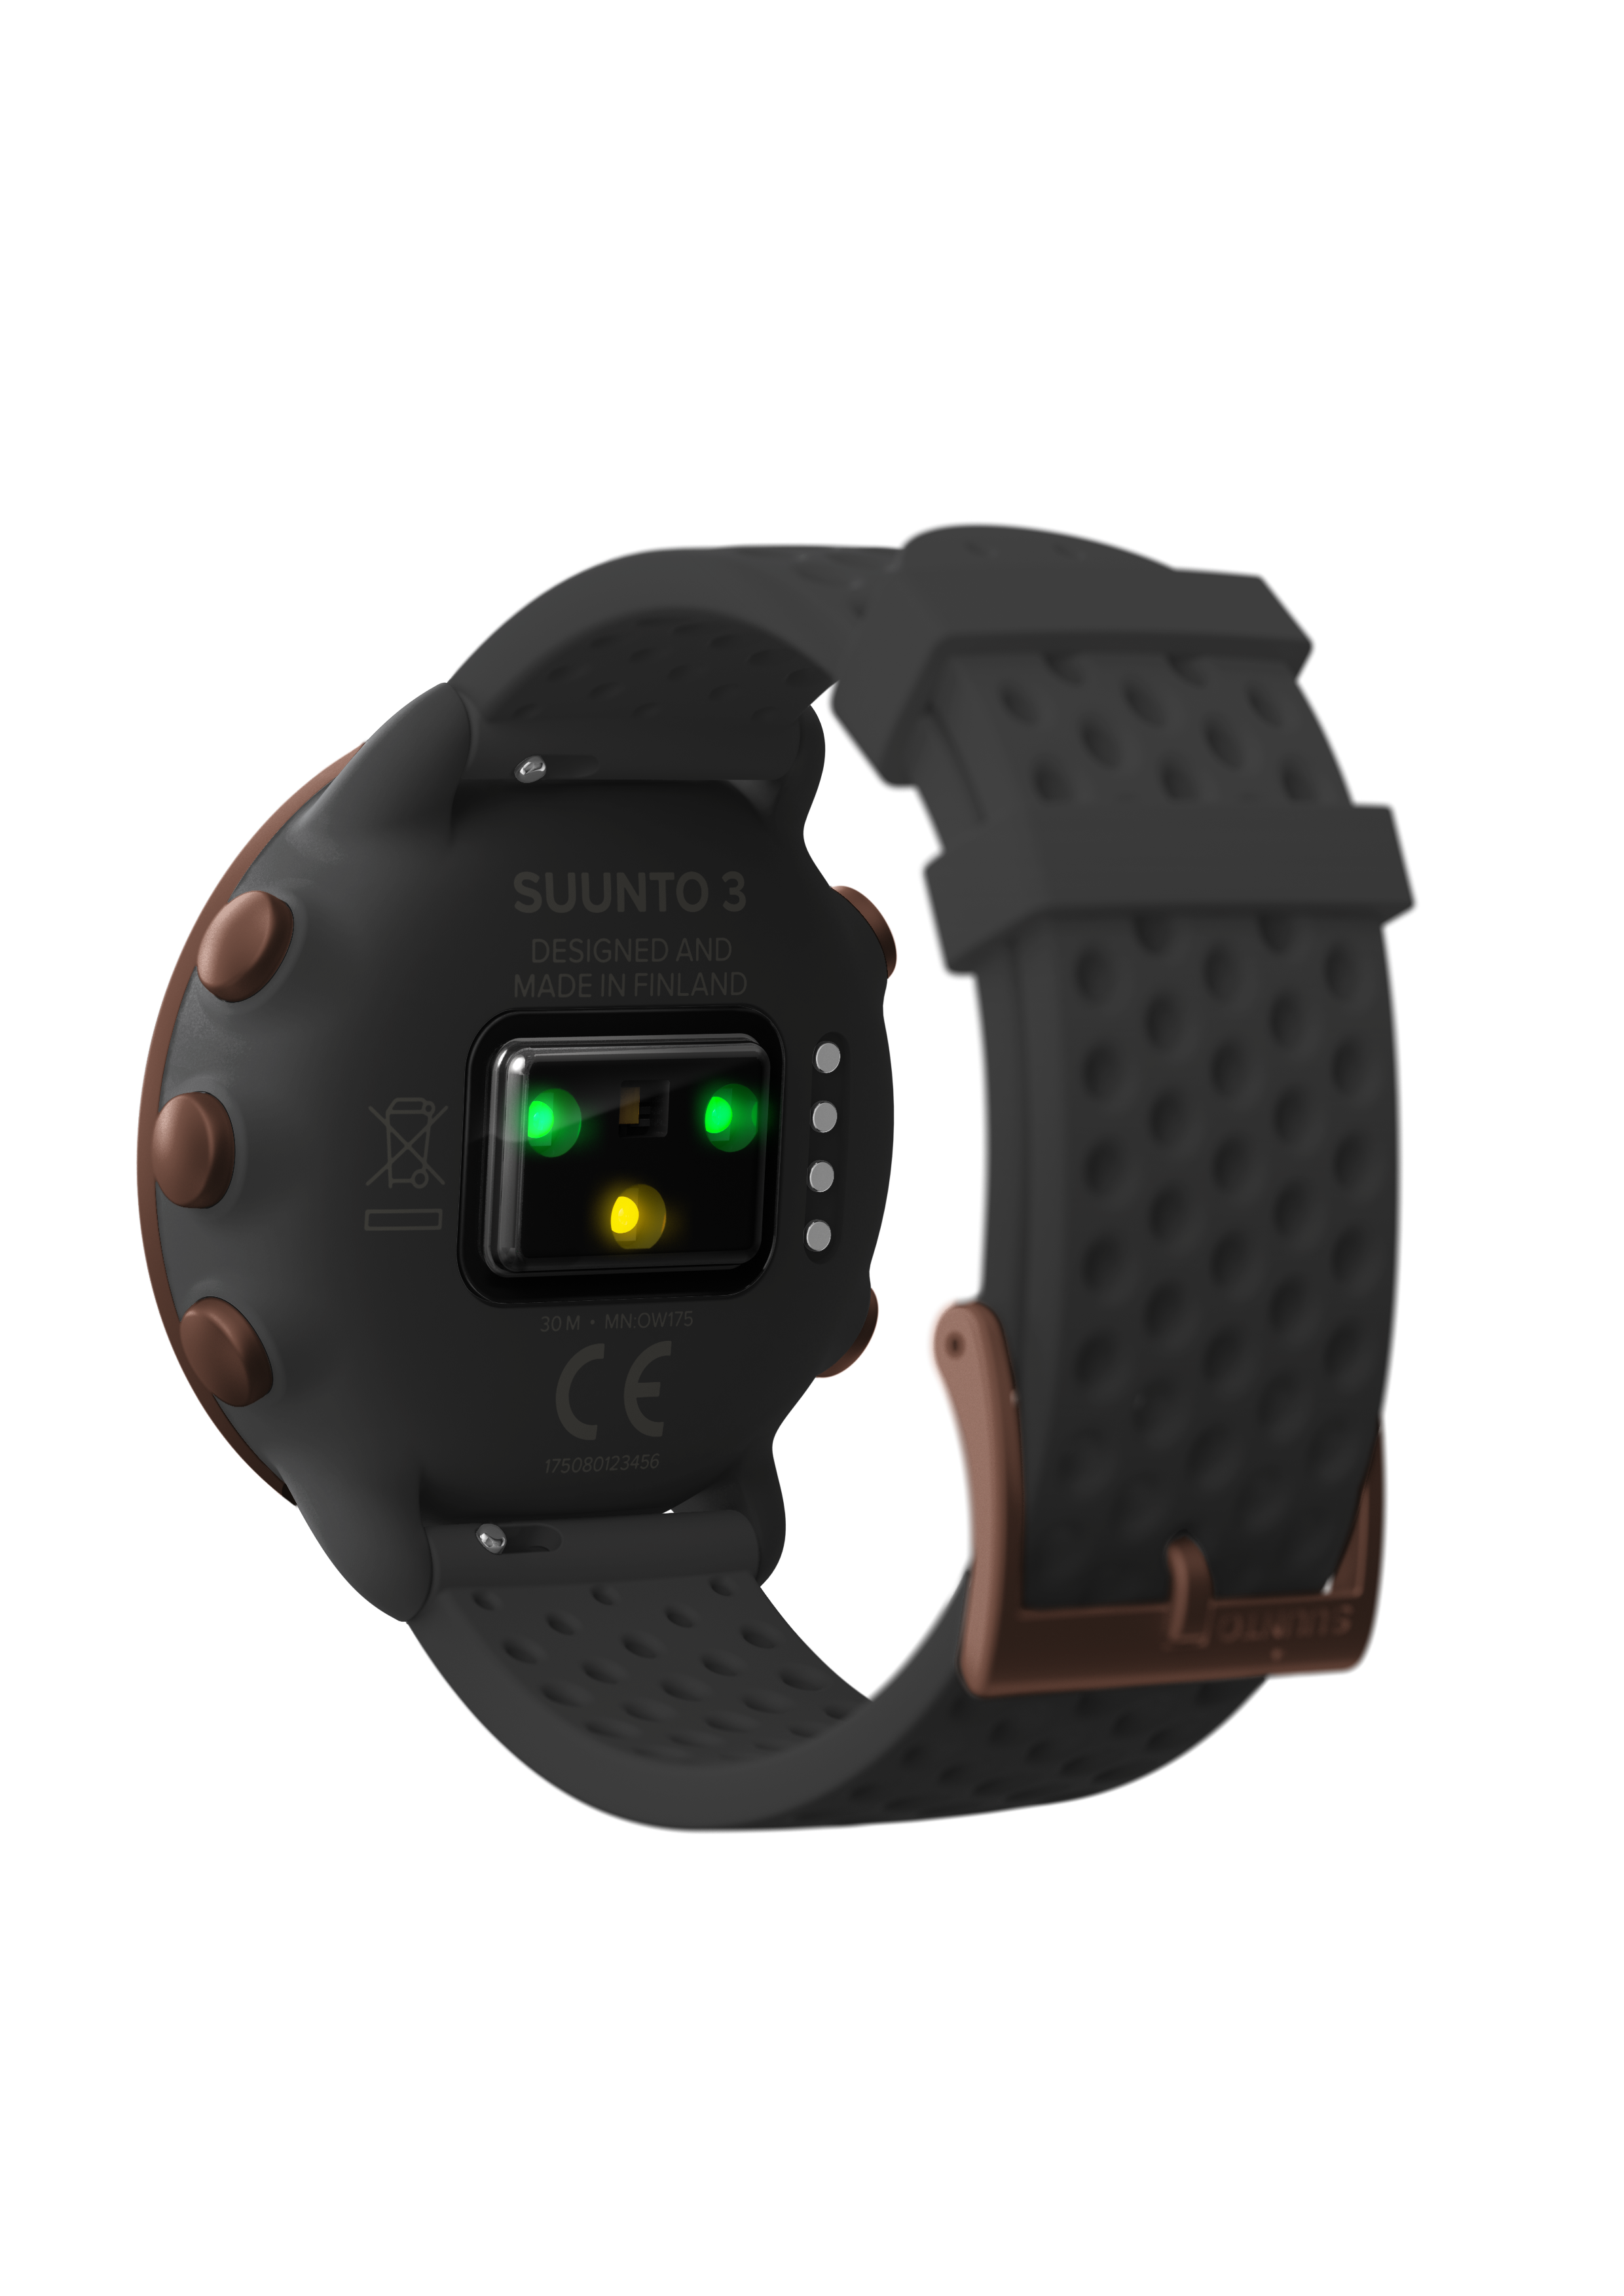 SS050415000 - SUUNTO 3 SLATE GREY COPPER - Rear Perspective View.png